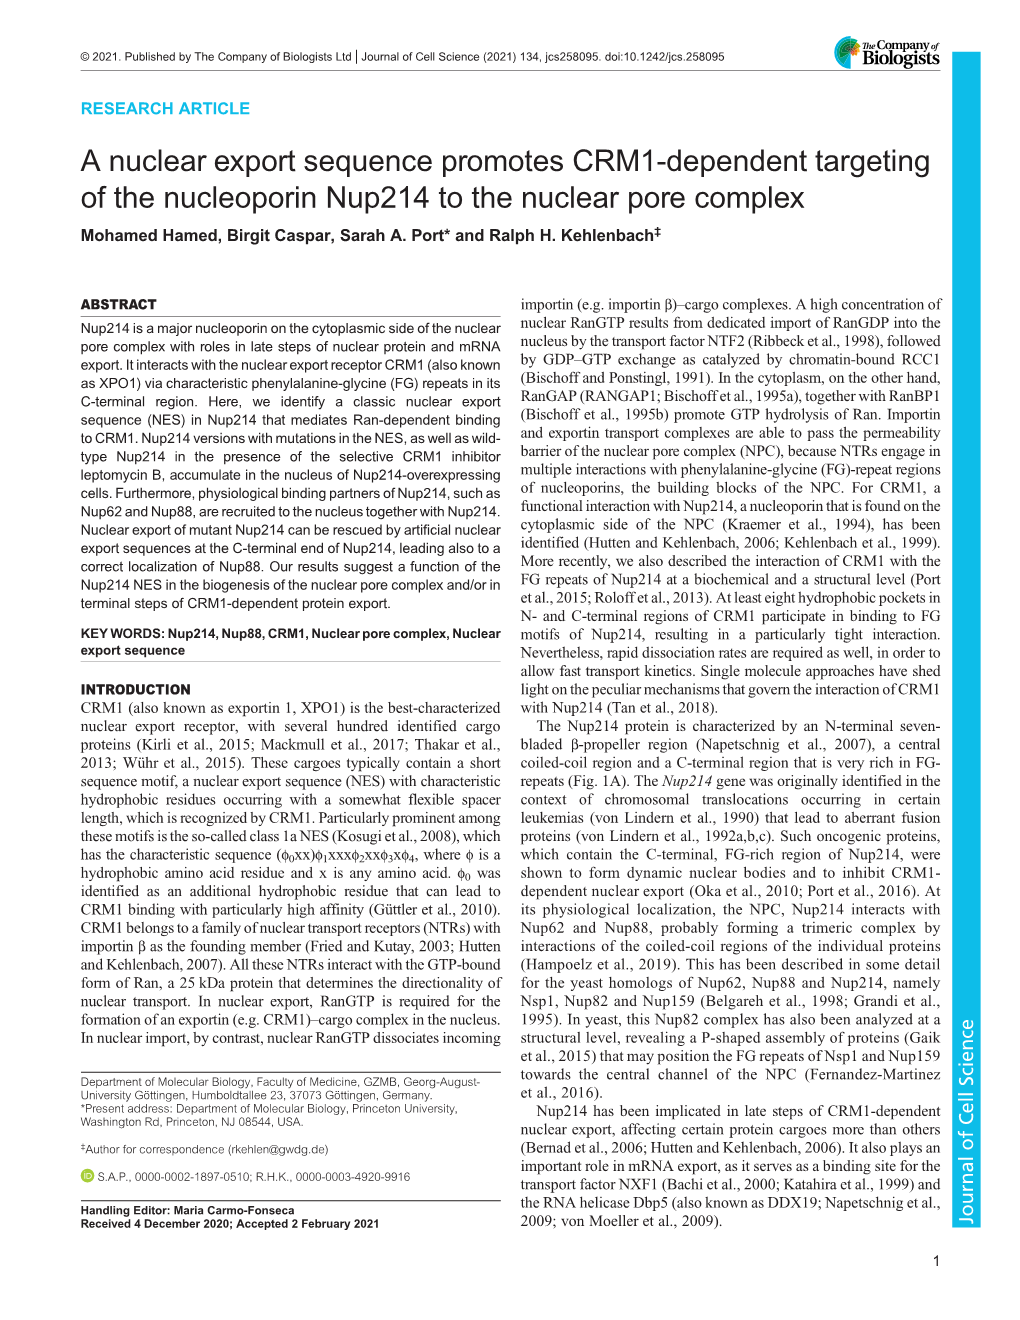 A Nuclear Export Sequence Promotes CRM1-Dependent Targeting of the Nucleoporin Nup214 to the Nuclear Pore Complex Mohamed Hamed, Birgit Caspar, Sarah A